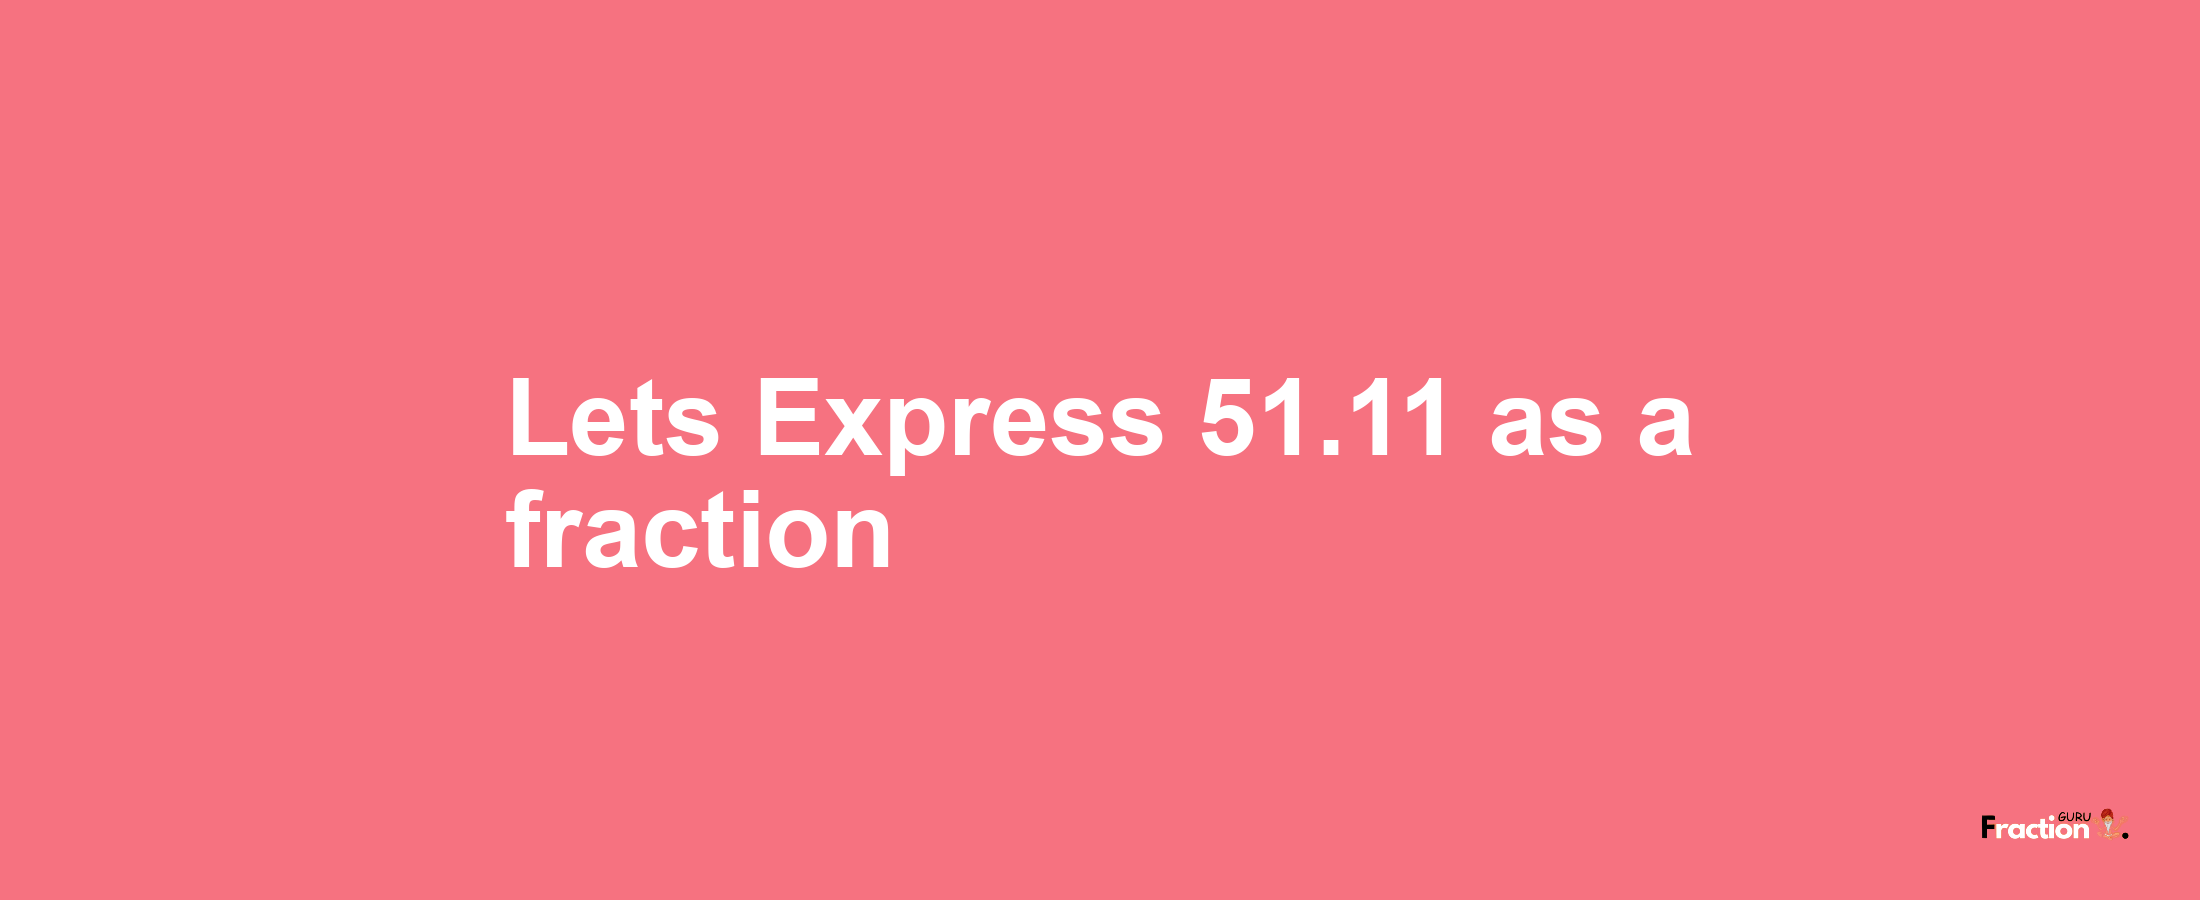 Lets Express 51.11 as afraction